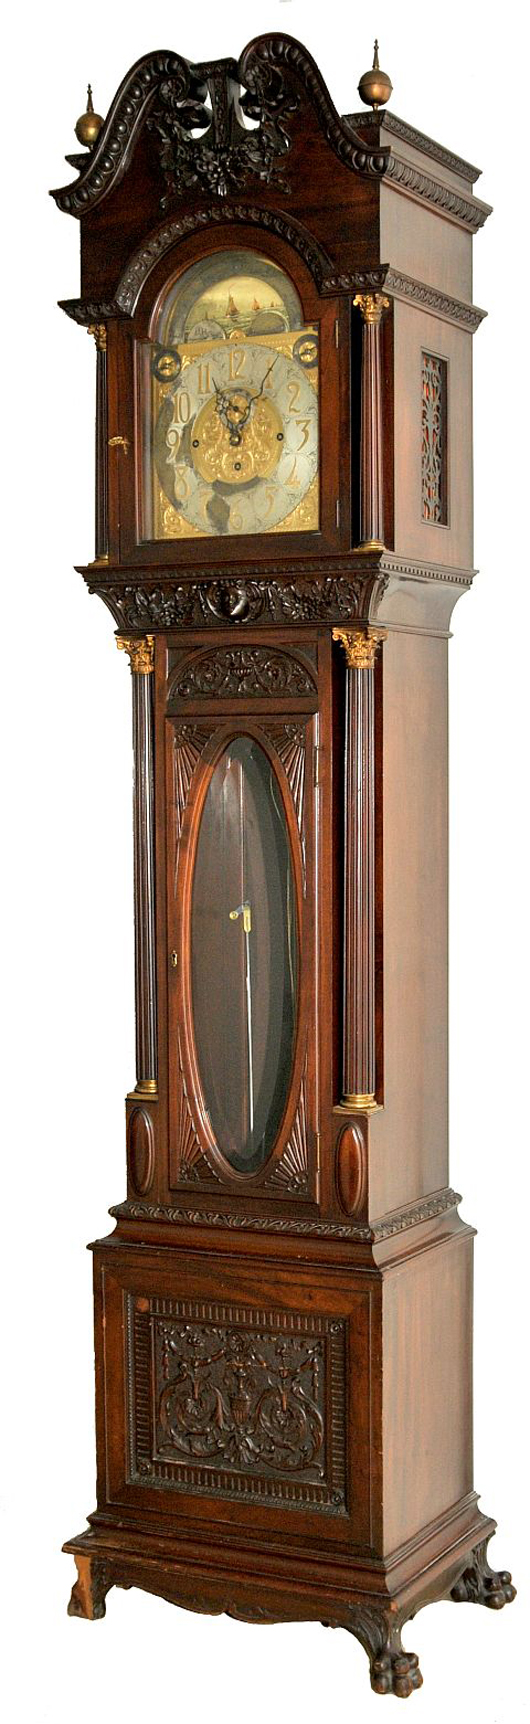 George III-style mahogany long-case clock, John Creed Jennens & Sons, London circa 1875-1881, 12-inch silver brass dial with  pierced steel hands signed ‘J.C Jennens & Sons, G.T. Sutton Street, London.' Height: 104 1/2 inches, width: 25 1/2 inches, depth: 19 inches. Estimate: $8,000-$10,000. Image courtesy of Gray’s Auctioneers.